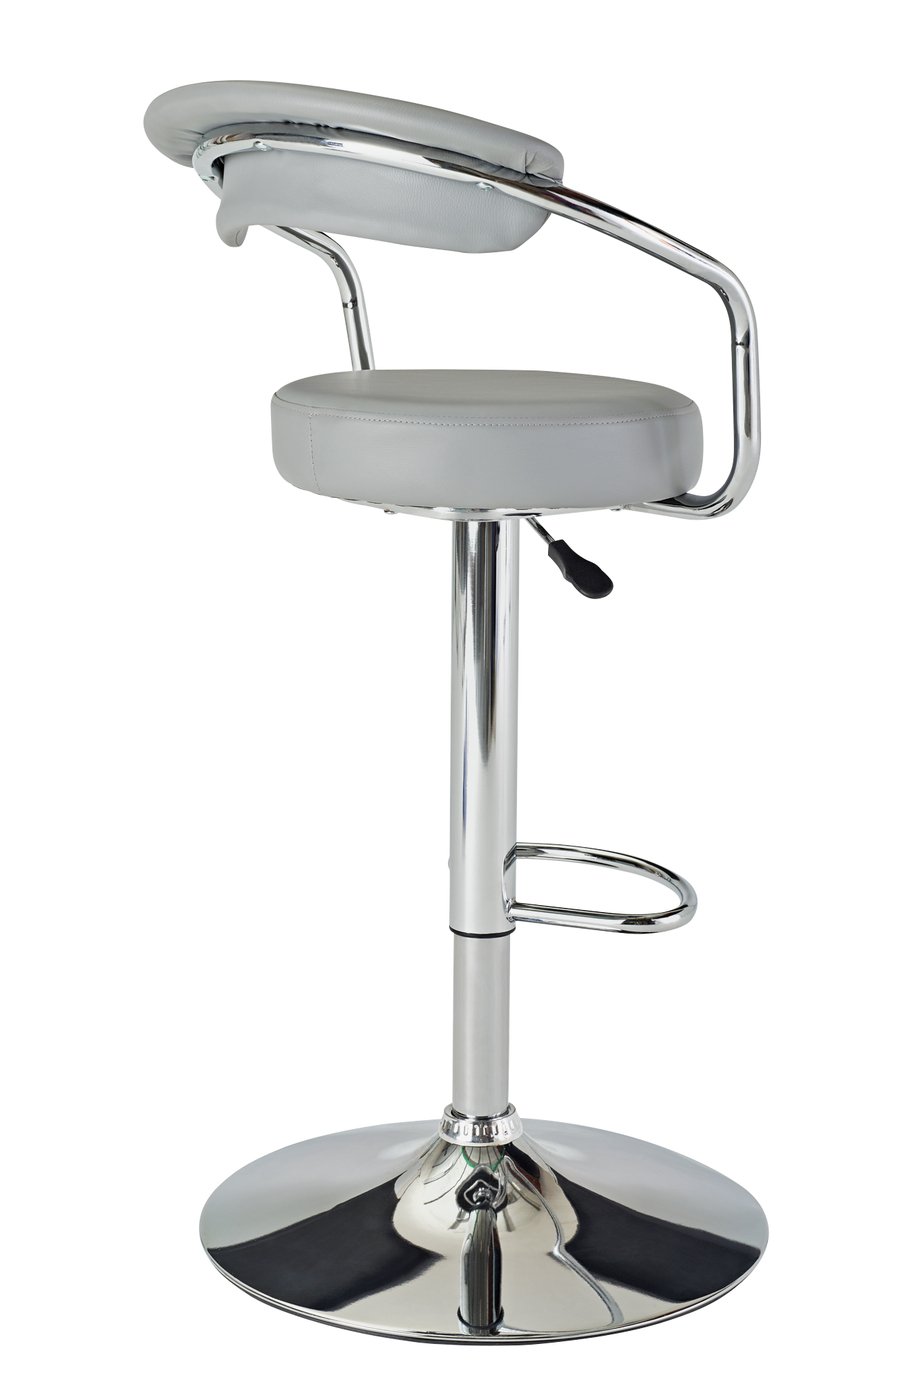 Argos Home Executive Gas Lift Bar Stool with Back Rest- Grey Review